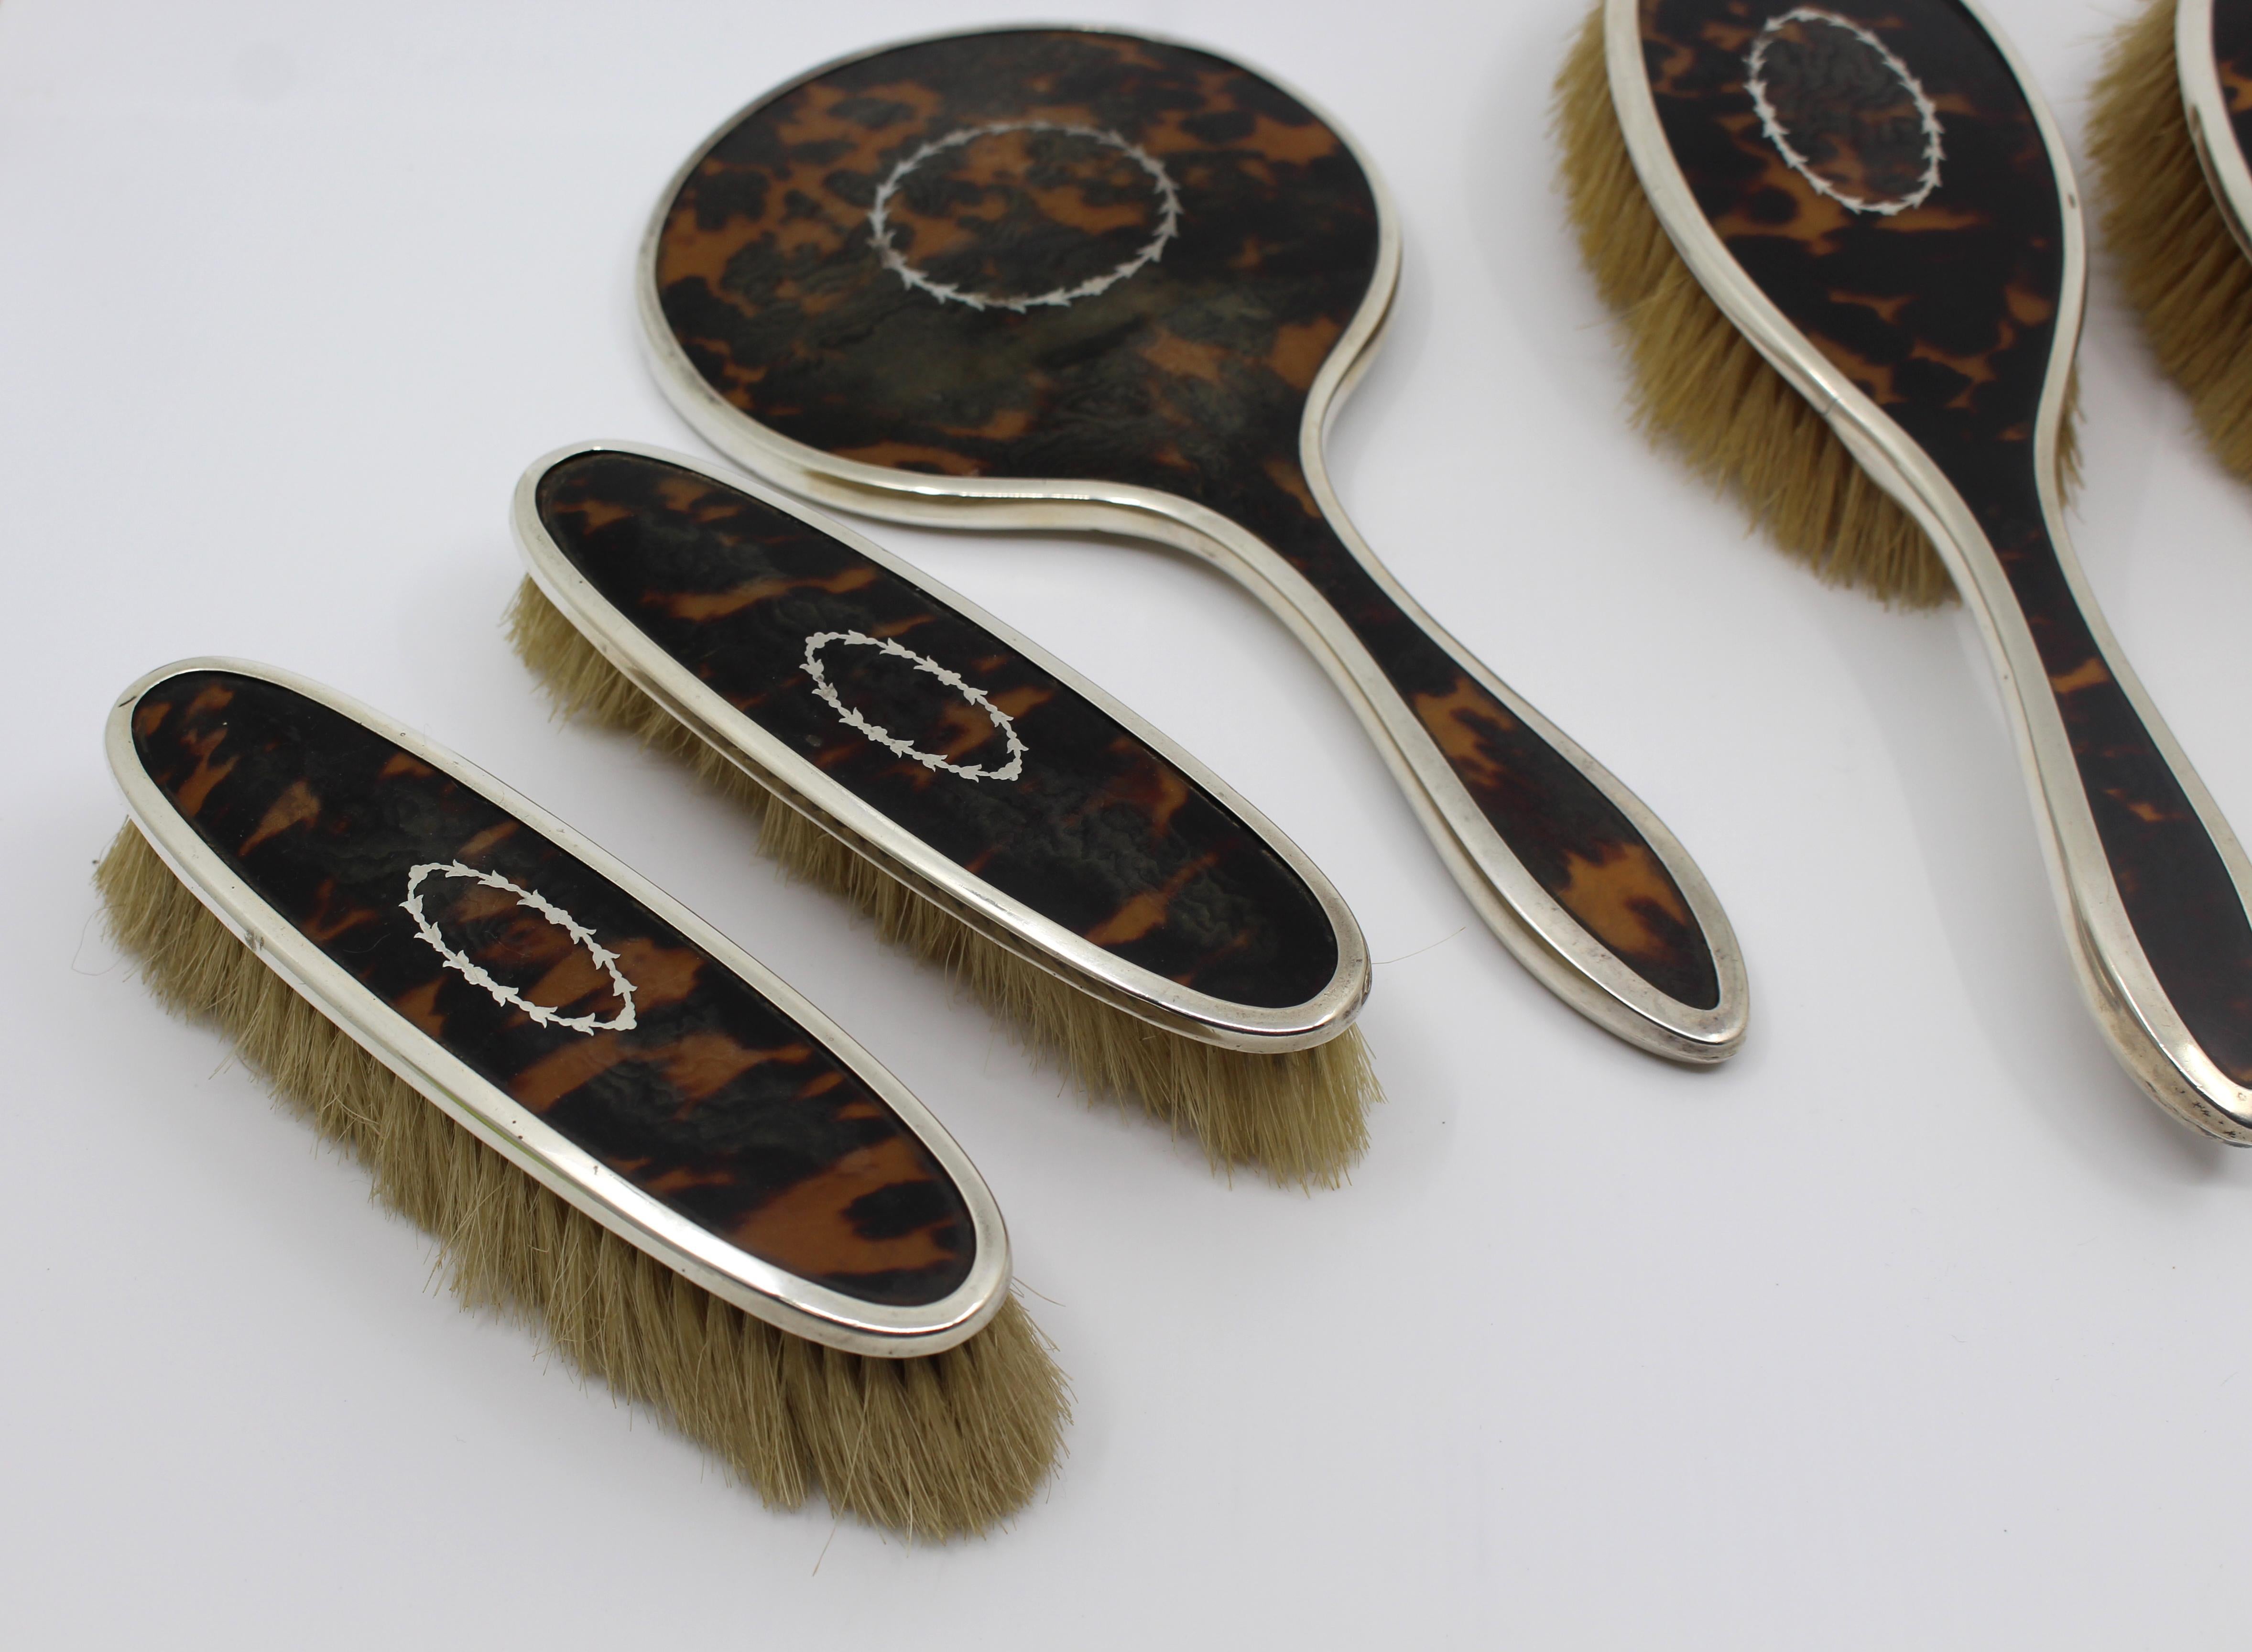 Period early 20th century, English
Maker F H Adams & Co.
Hallmark Birmingham, 1923
Pieces 5 pieces: pair of clothes brushes, vanity mirror and pair of hair brushes
Condition Very good condition. Each piece fully hallmarked. Some wear and a few